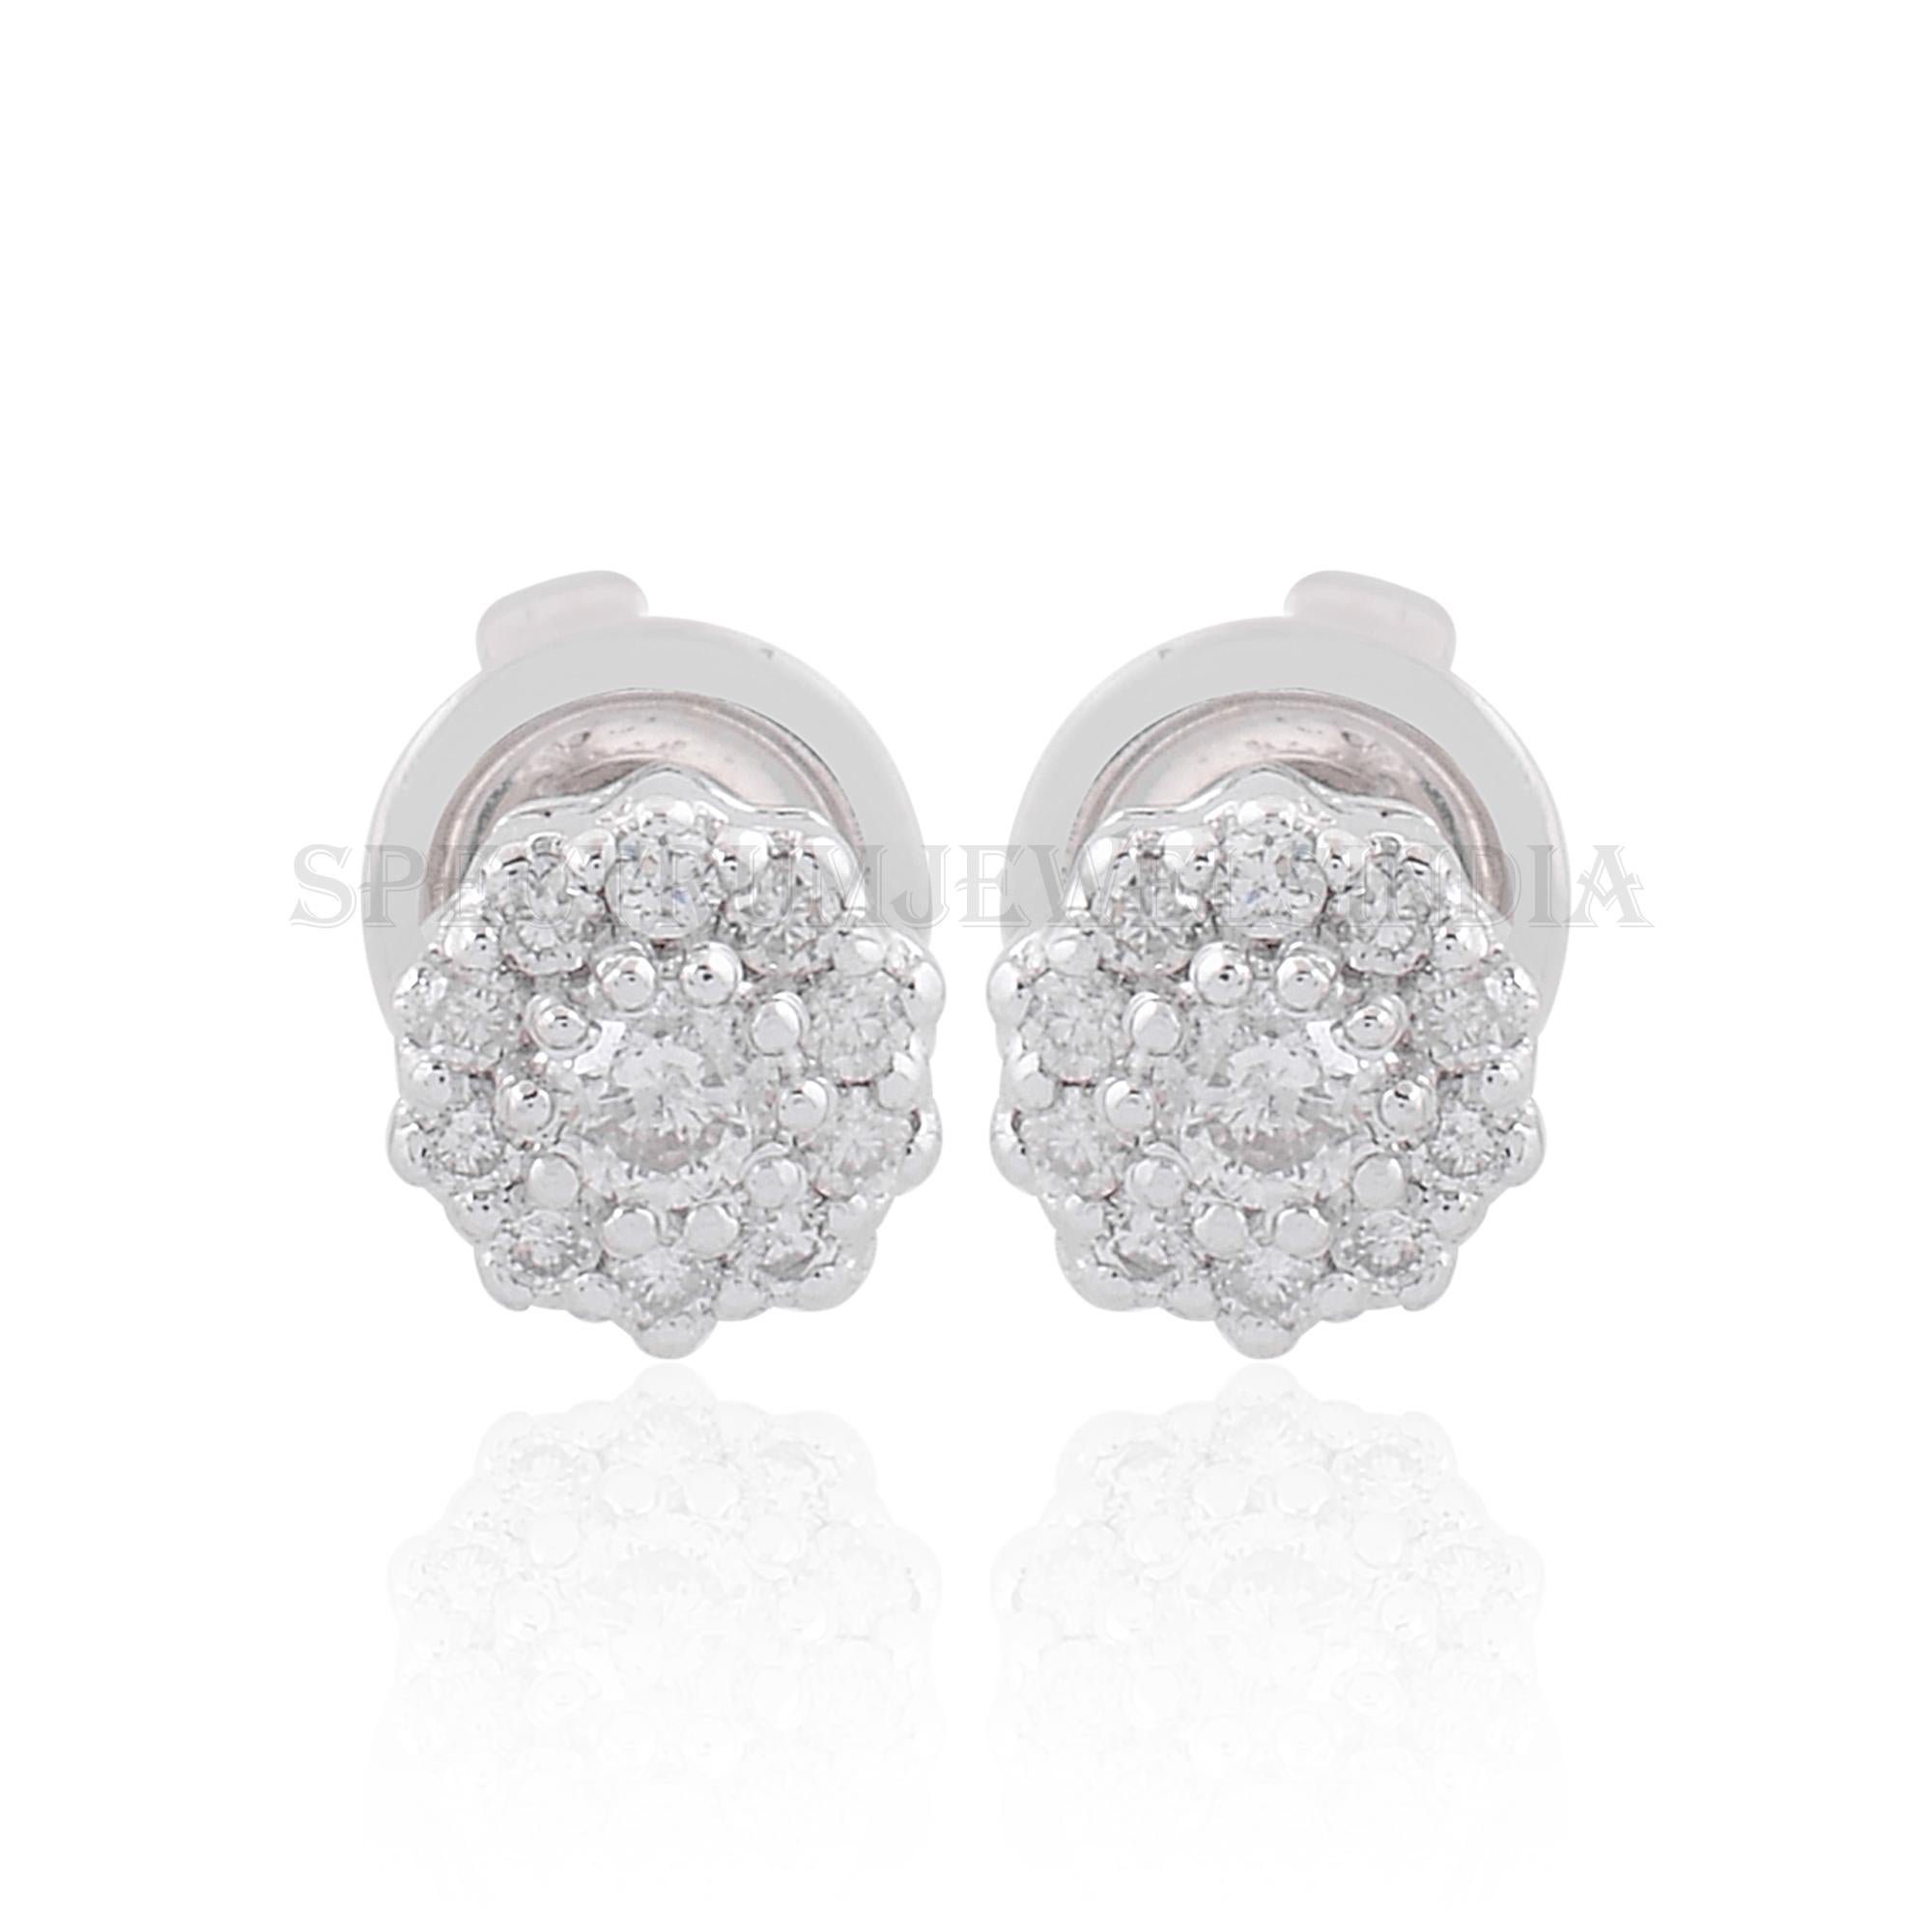 Indulge in timeless elegance with these exquisite Natural Round Diamond Stud Earrings, meticulously crafted in 18 Karat White Gold by skilled artisans to adorn your ears with brilliance and sophistication.

Item Code :- SEE-1603 (14k)
Gross Wt. :-